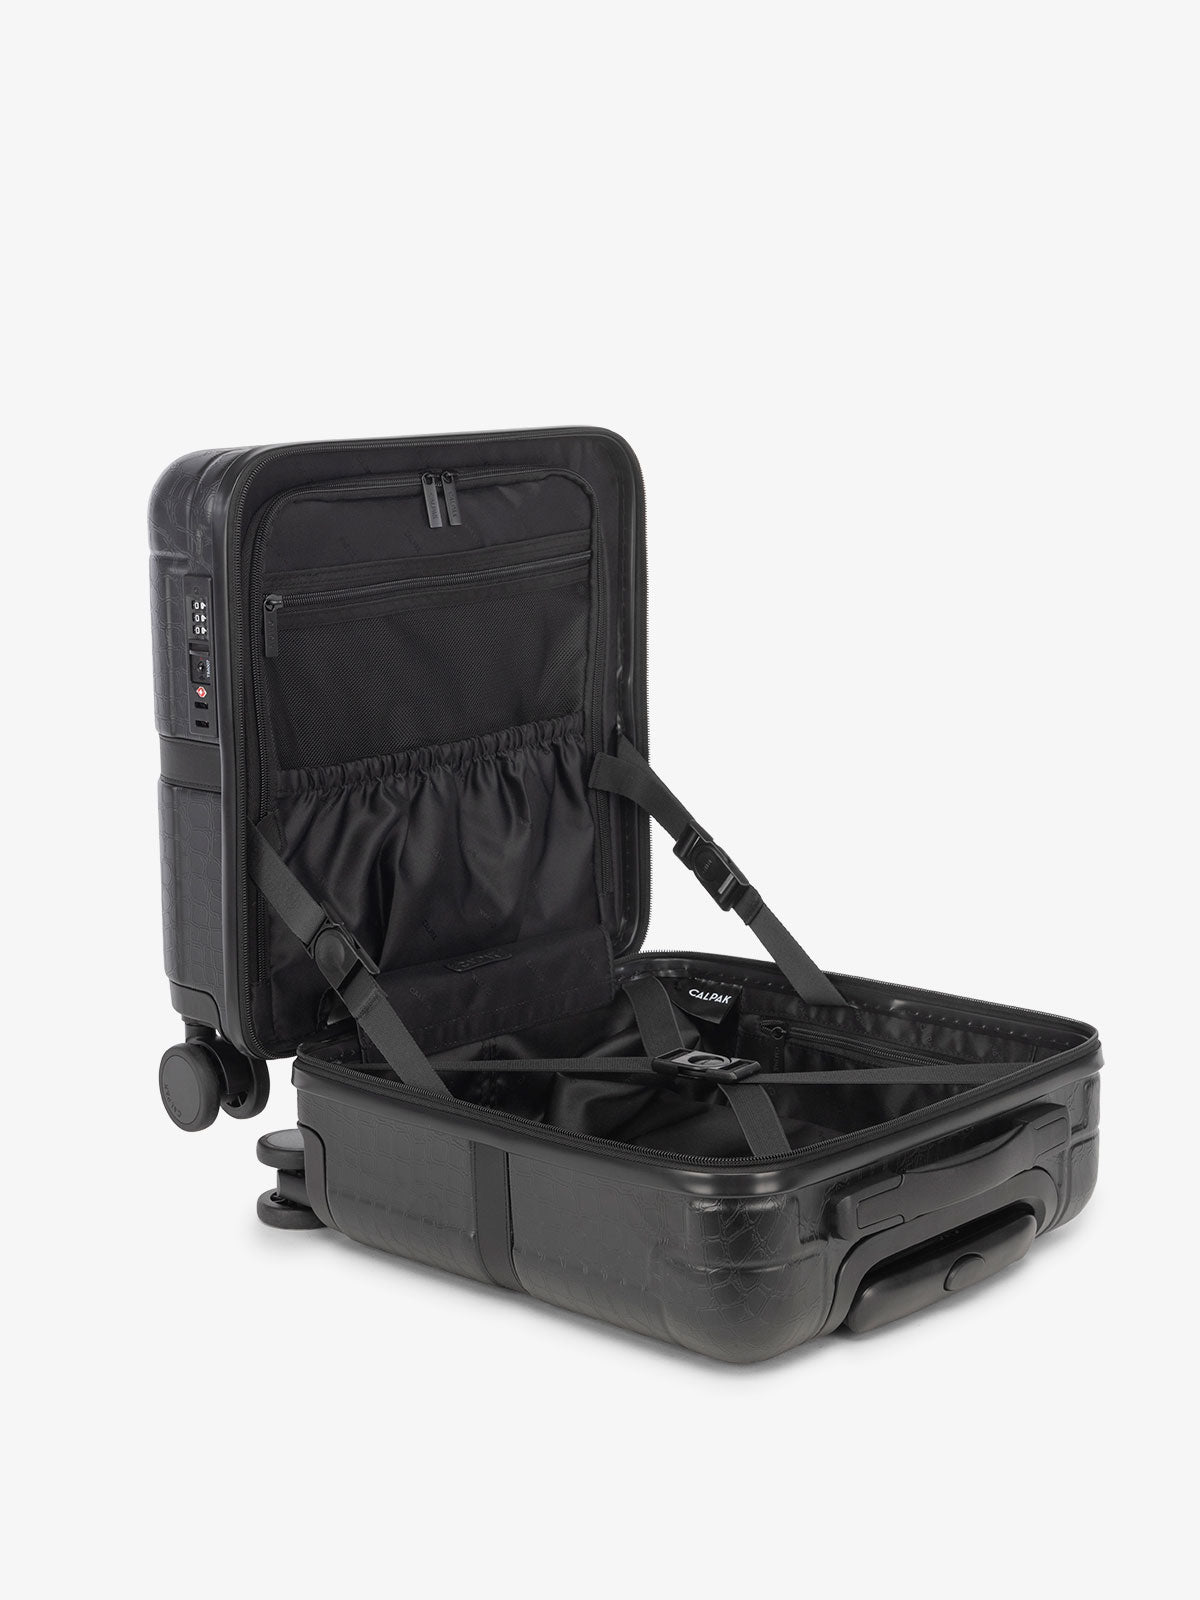 CALPAK TRNK small carry on luggage with wheels, interior compression strap and multiple pockets in black